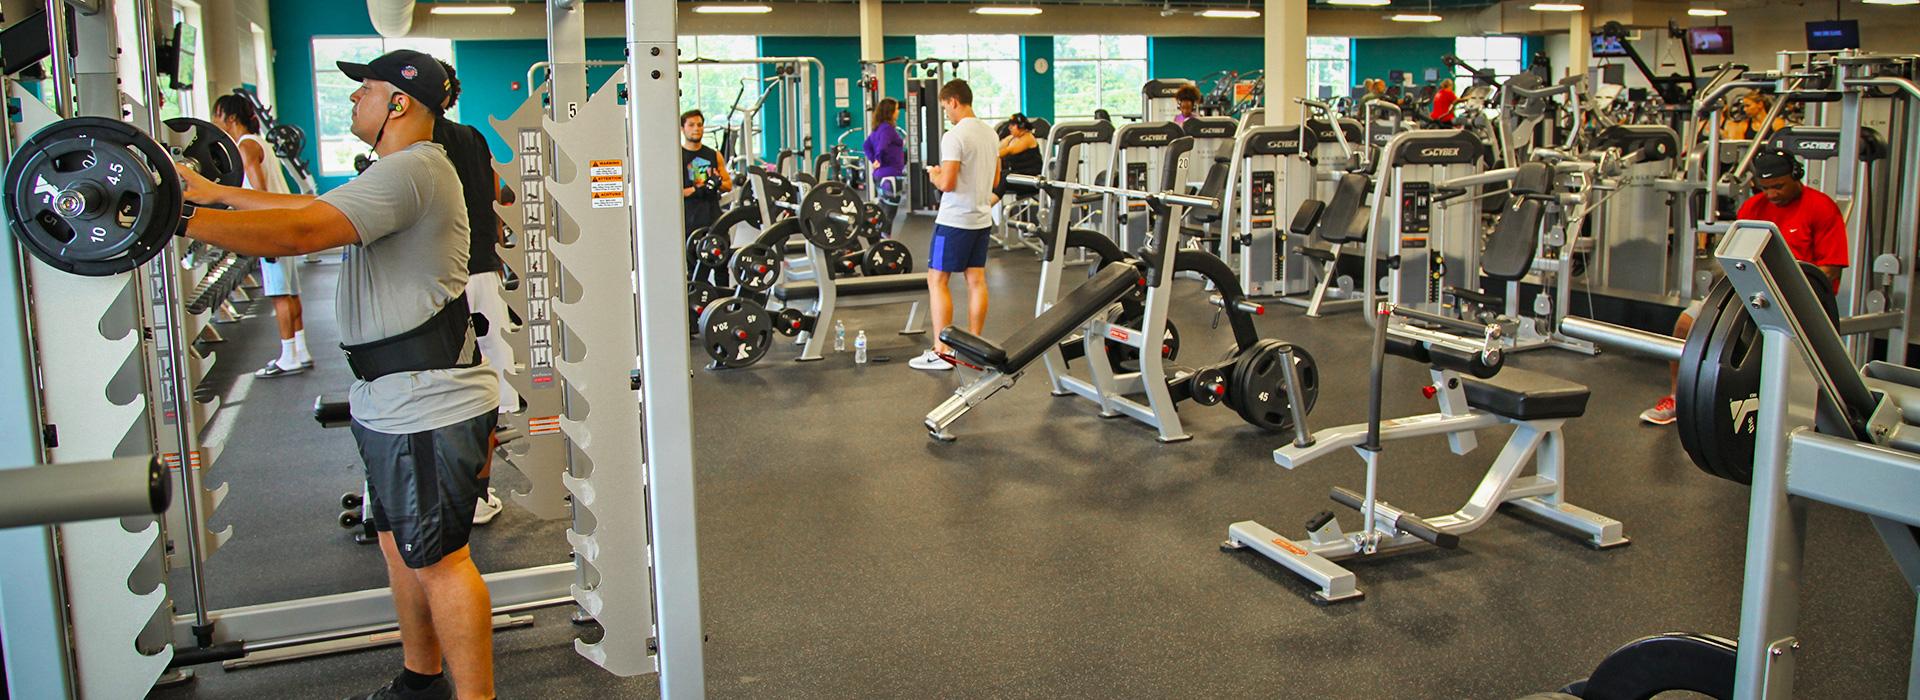 Squat rack and other free weight equipment in the wellness center of the Princess Anne Family YMCA